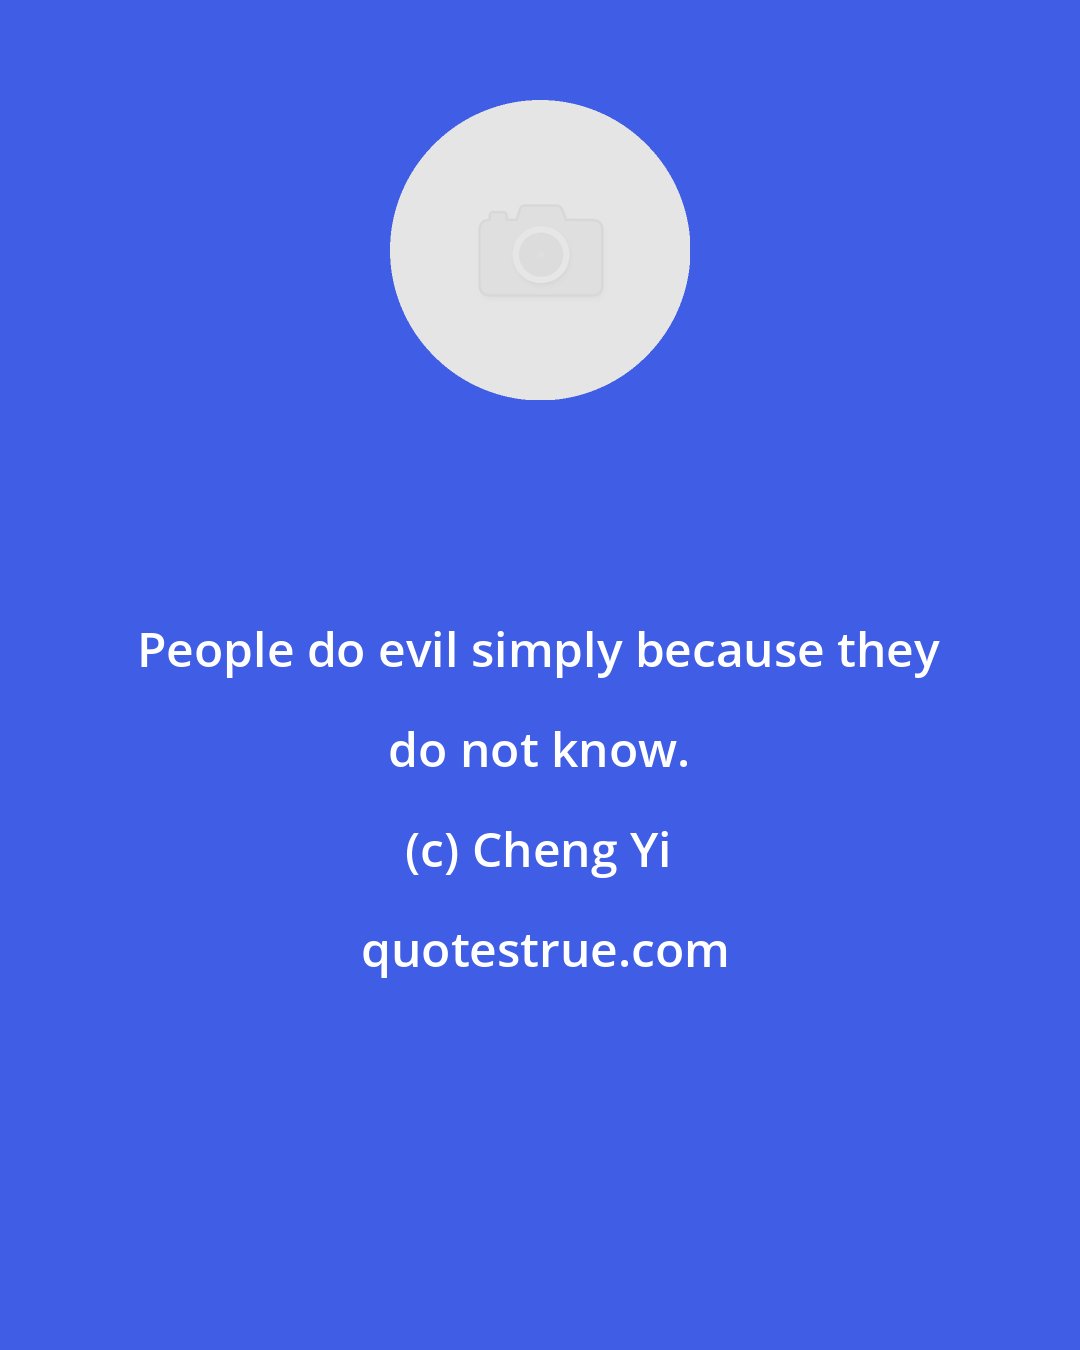 Cheng Yi: People do evil simply because they do not know.